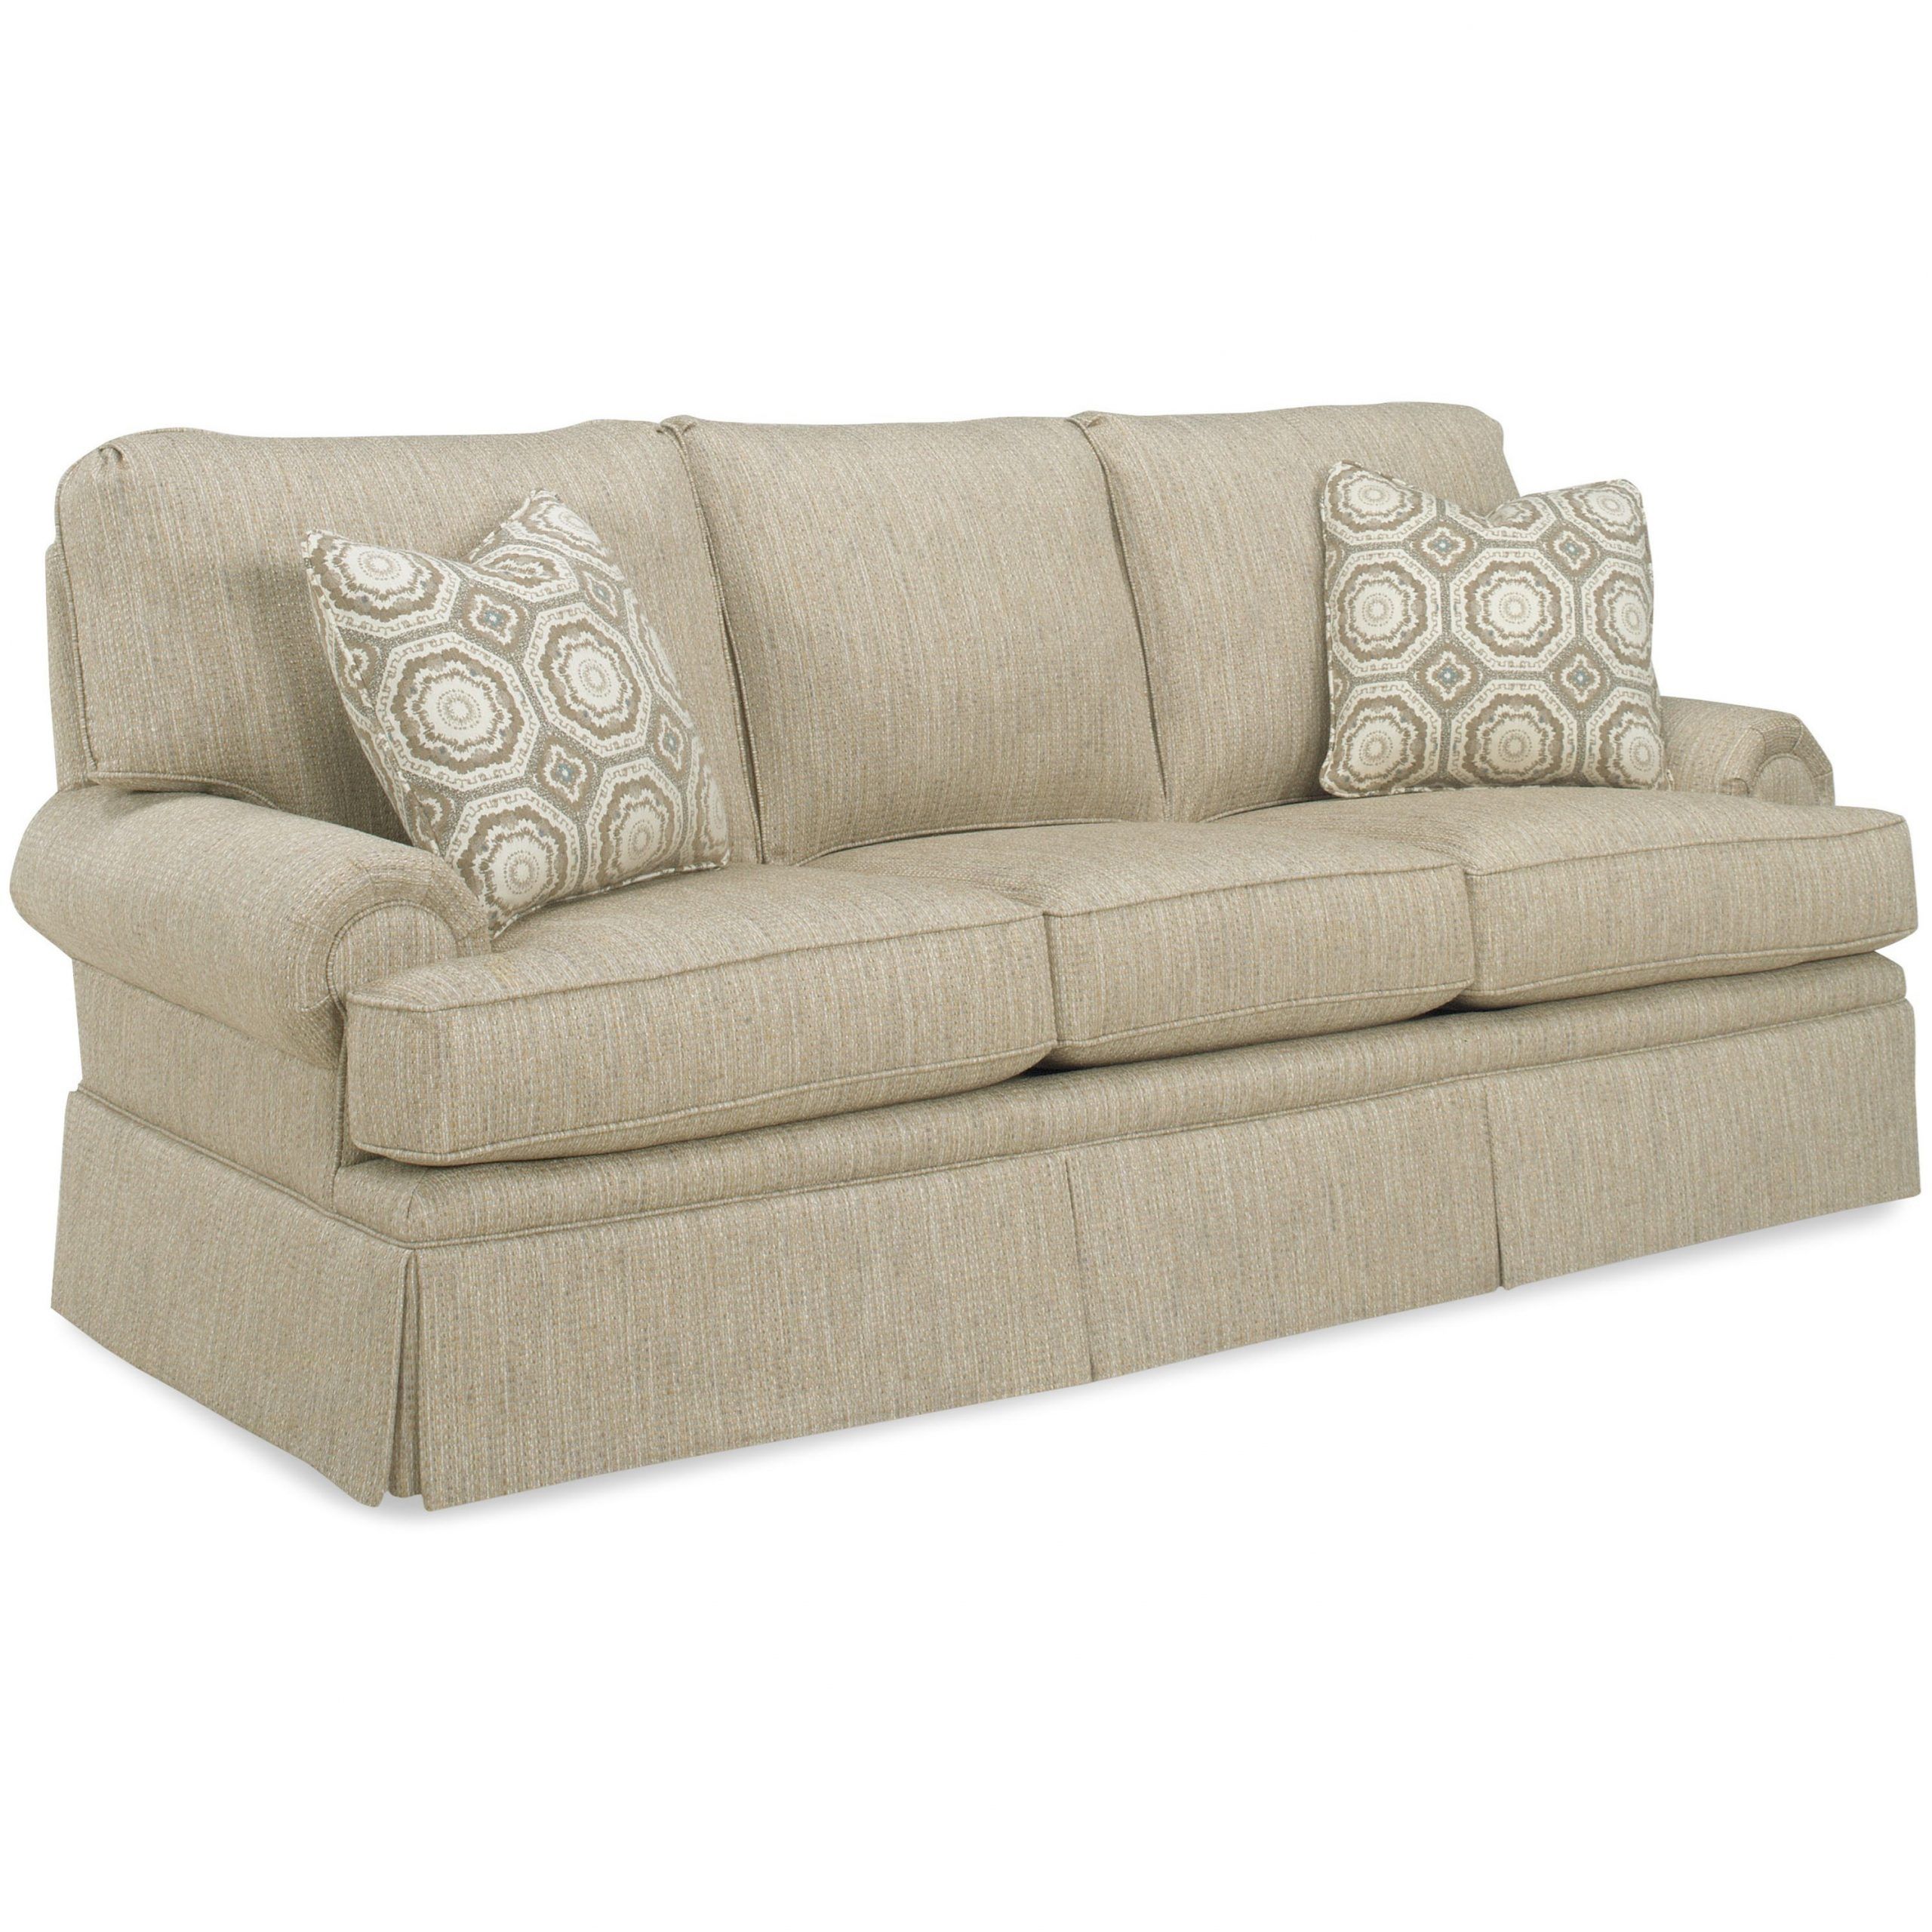 Temple Furniture Winston Sofa With Skirt | Mueller Pertaining To Winston Sofa Sectional Sofas (Photo 5 of 15)